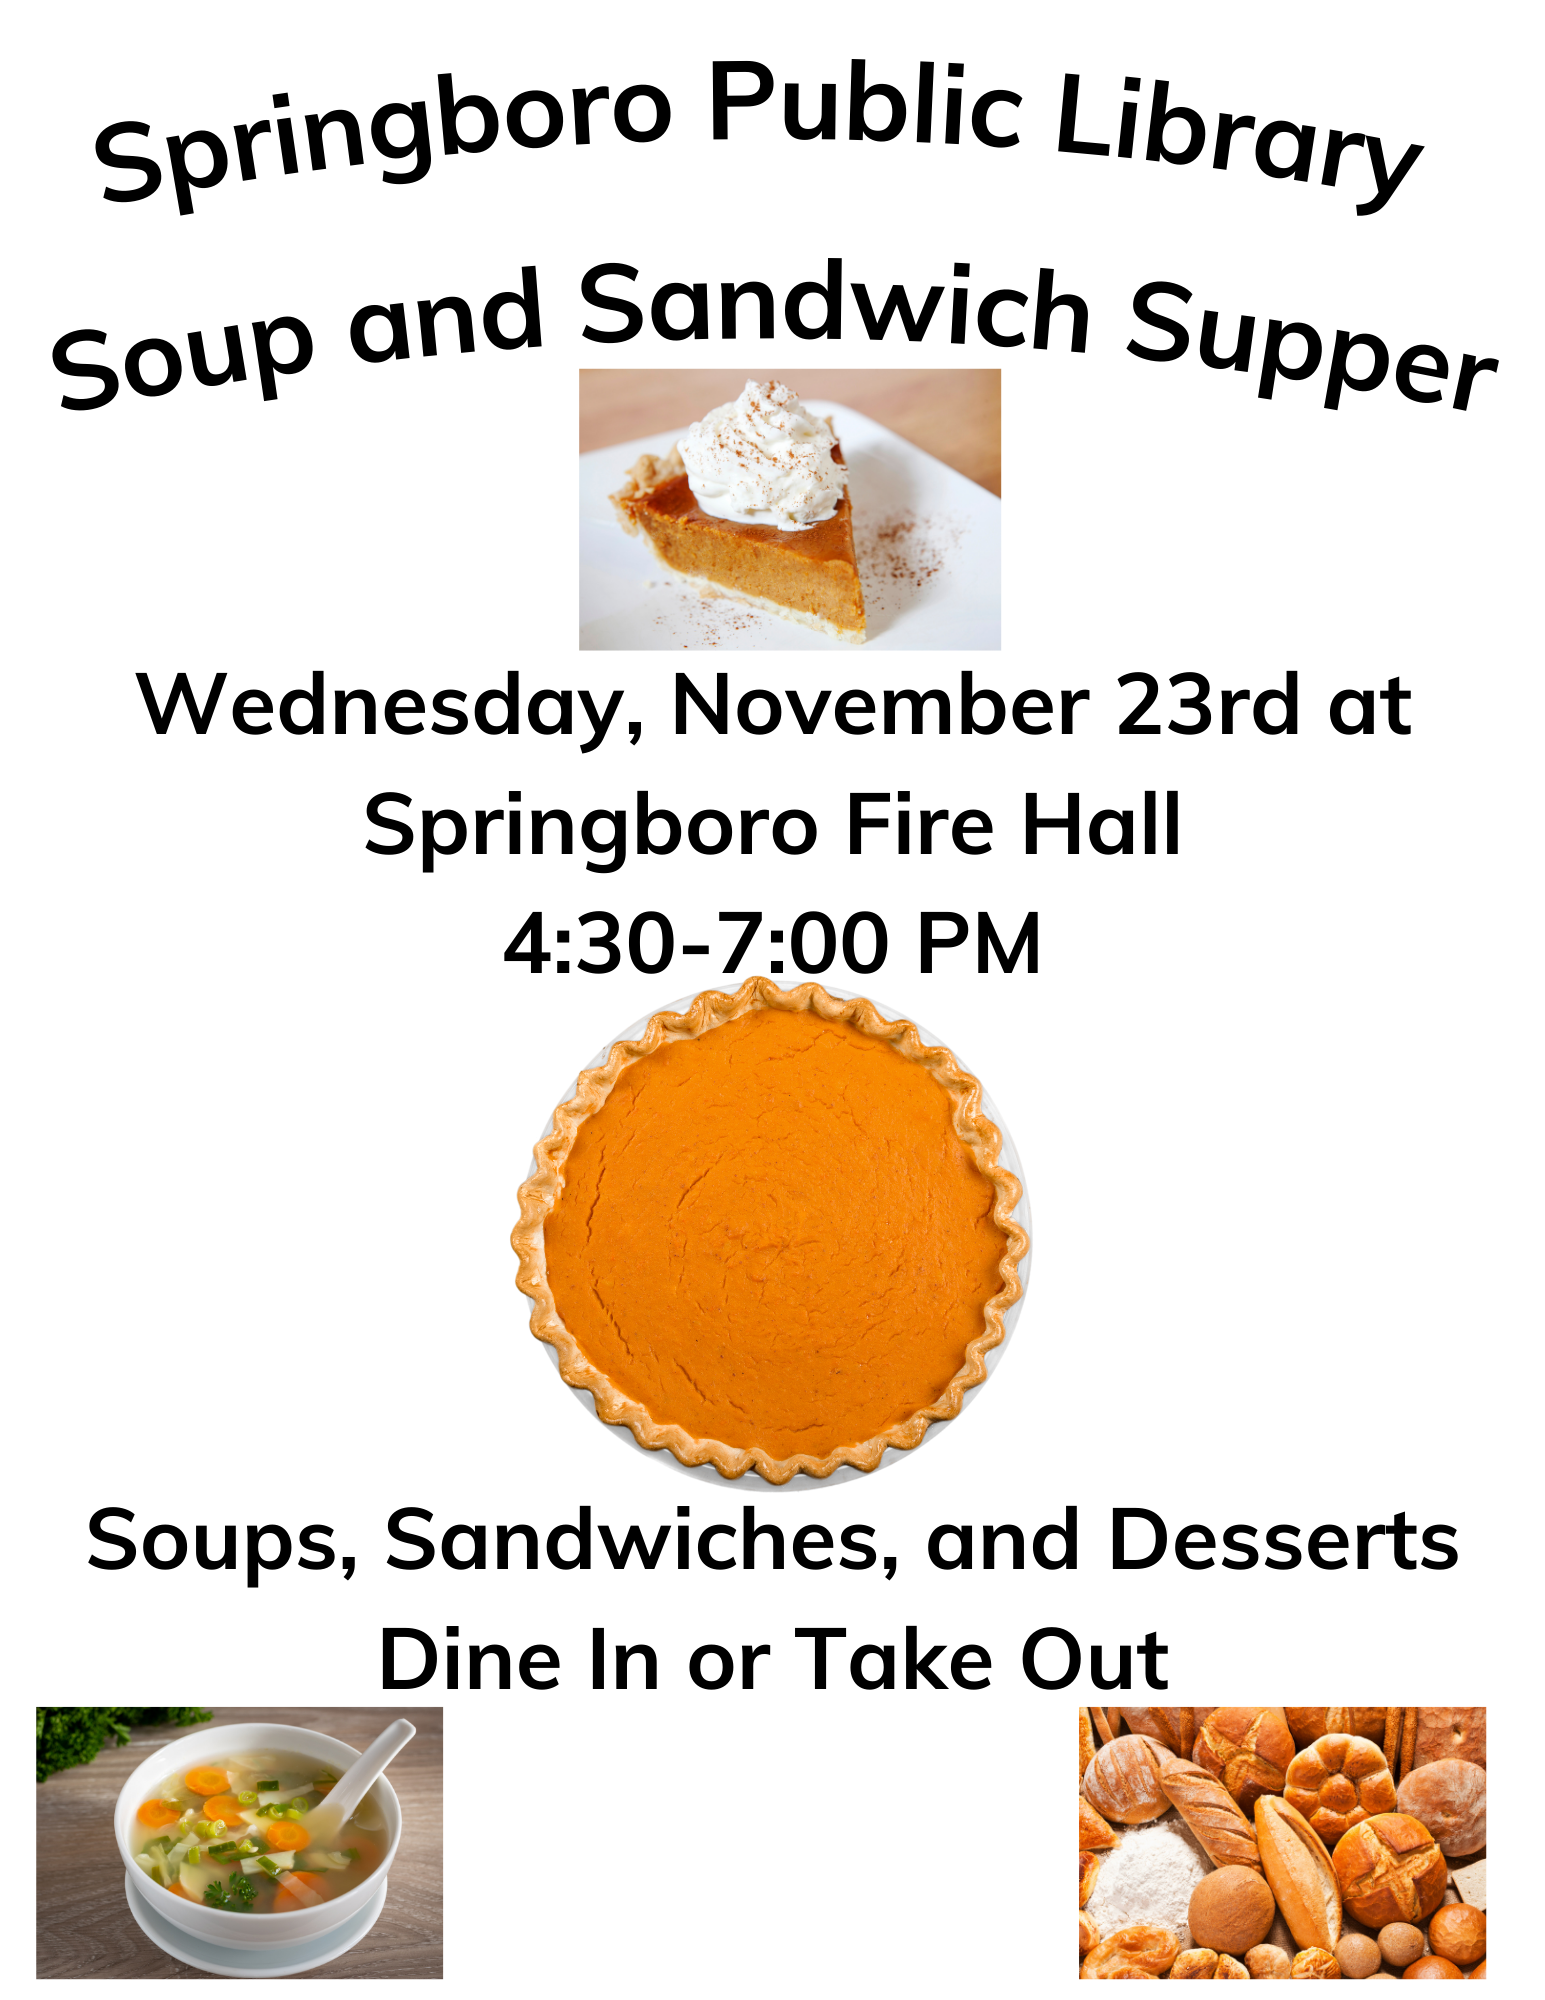 Springboro Public Library Soup and Sandwich Supper (1).png